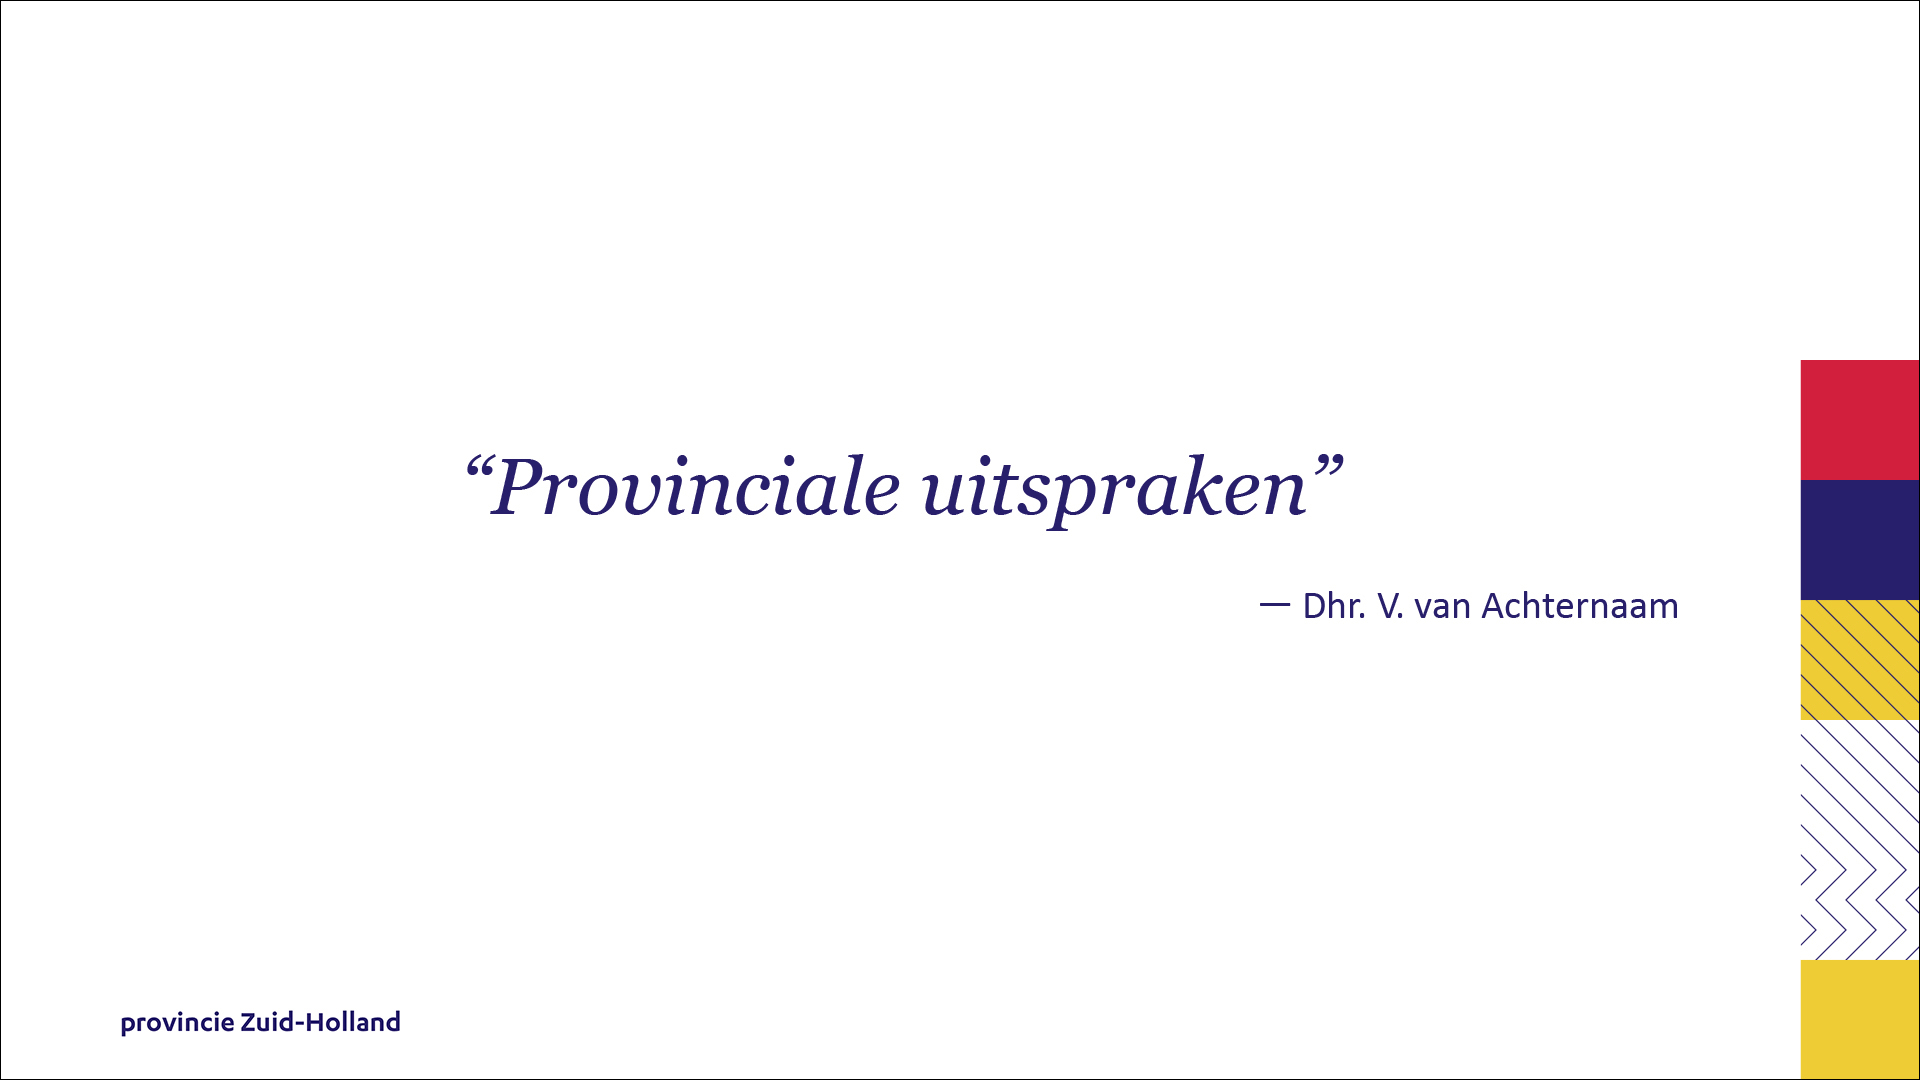 Powerpoint quote pagina